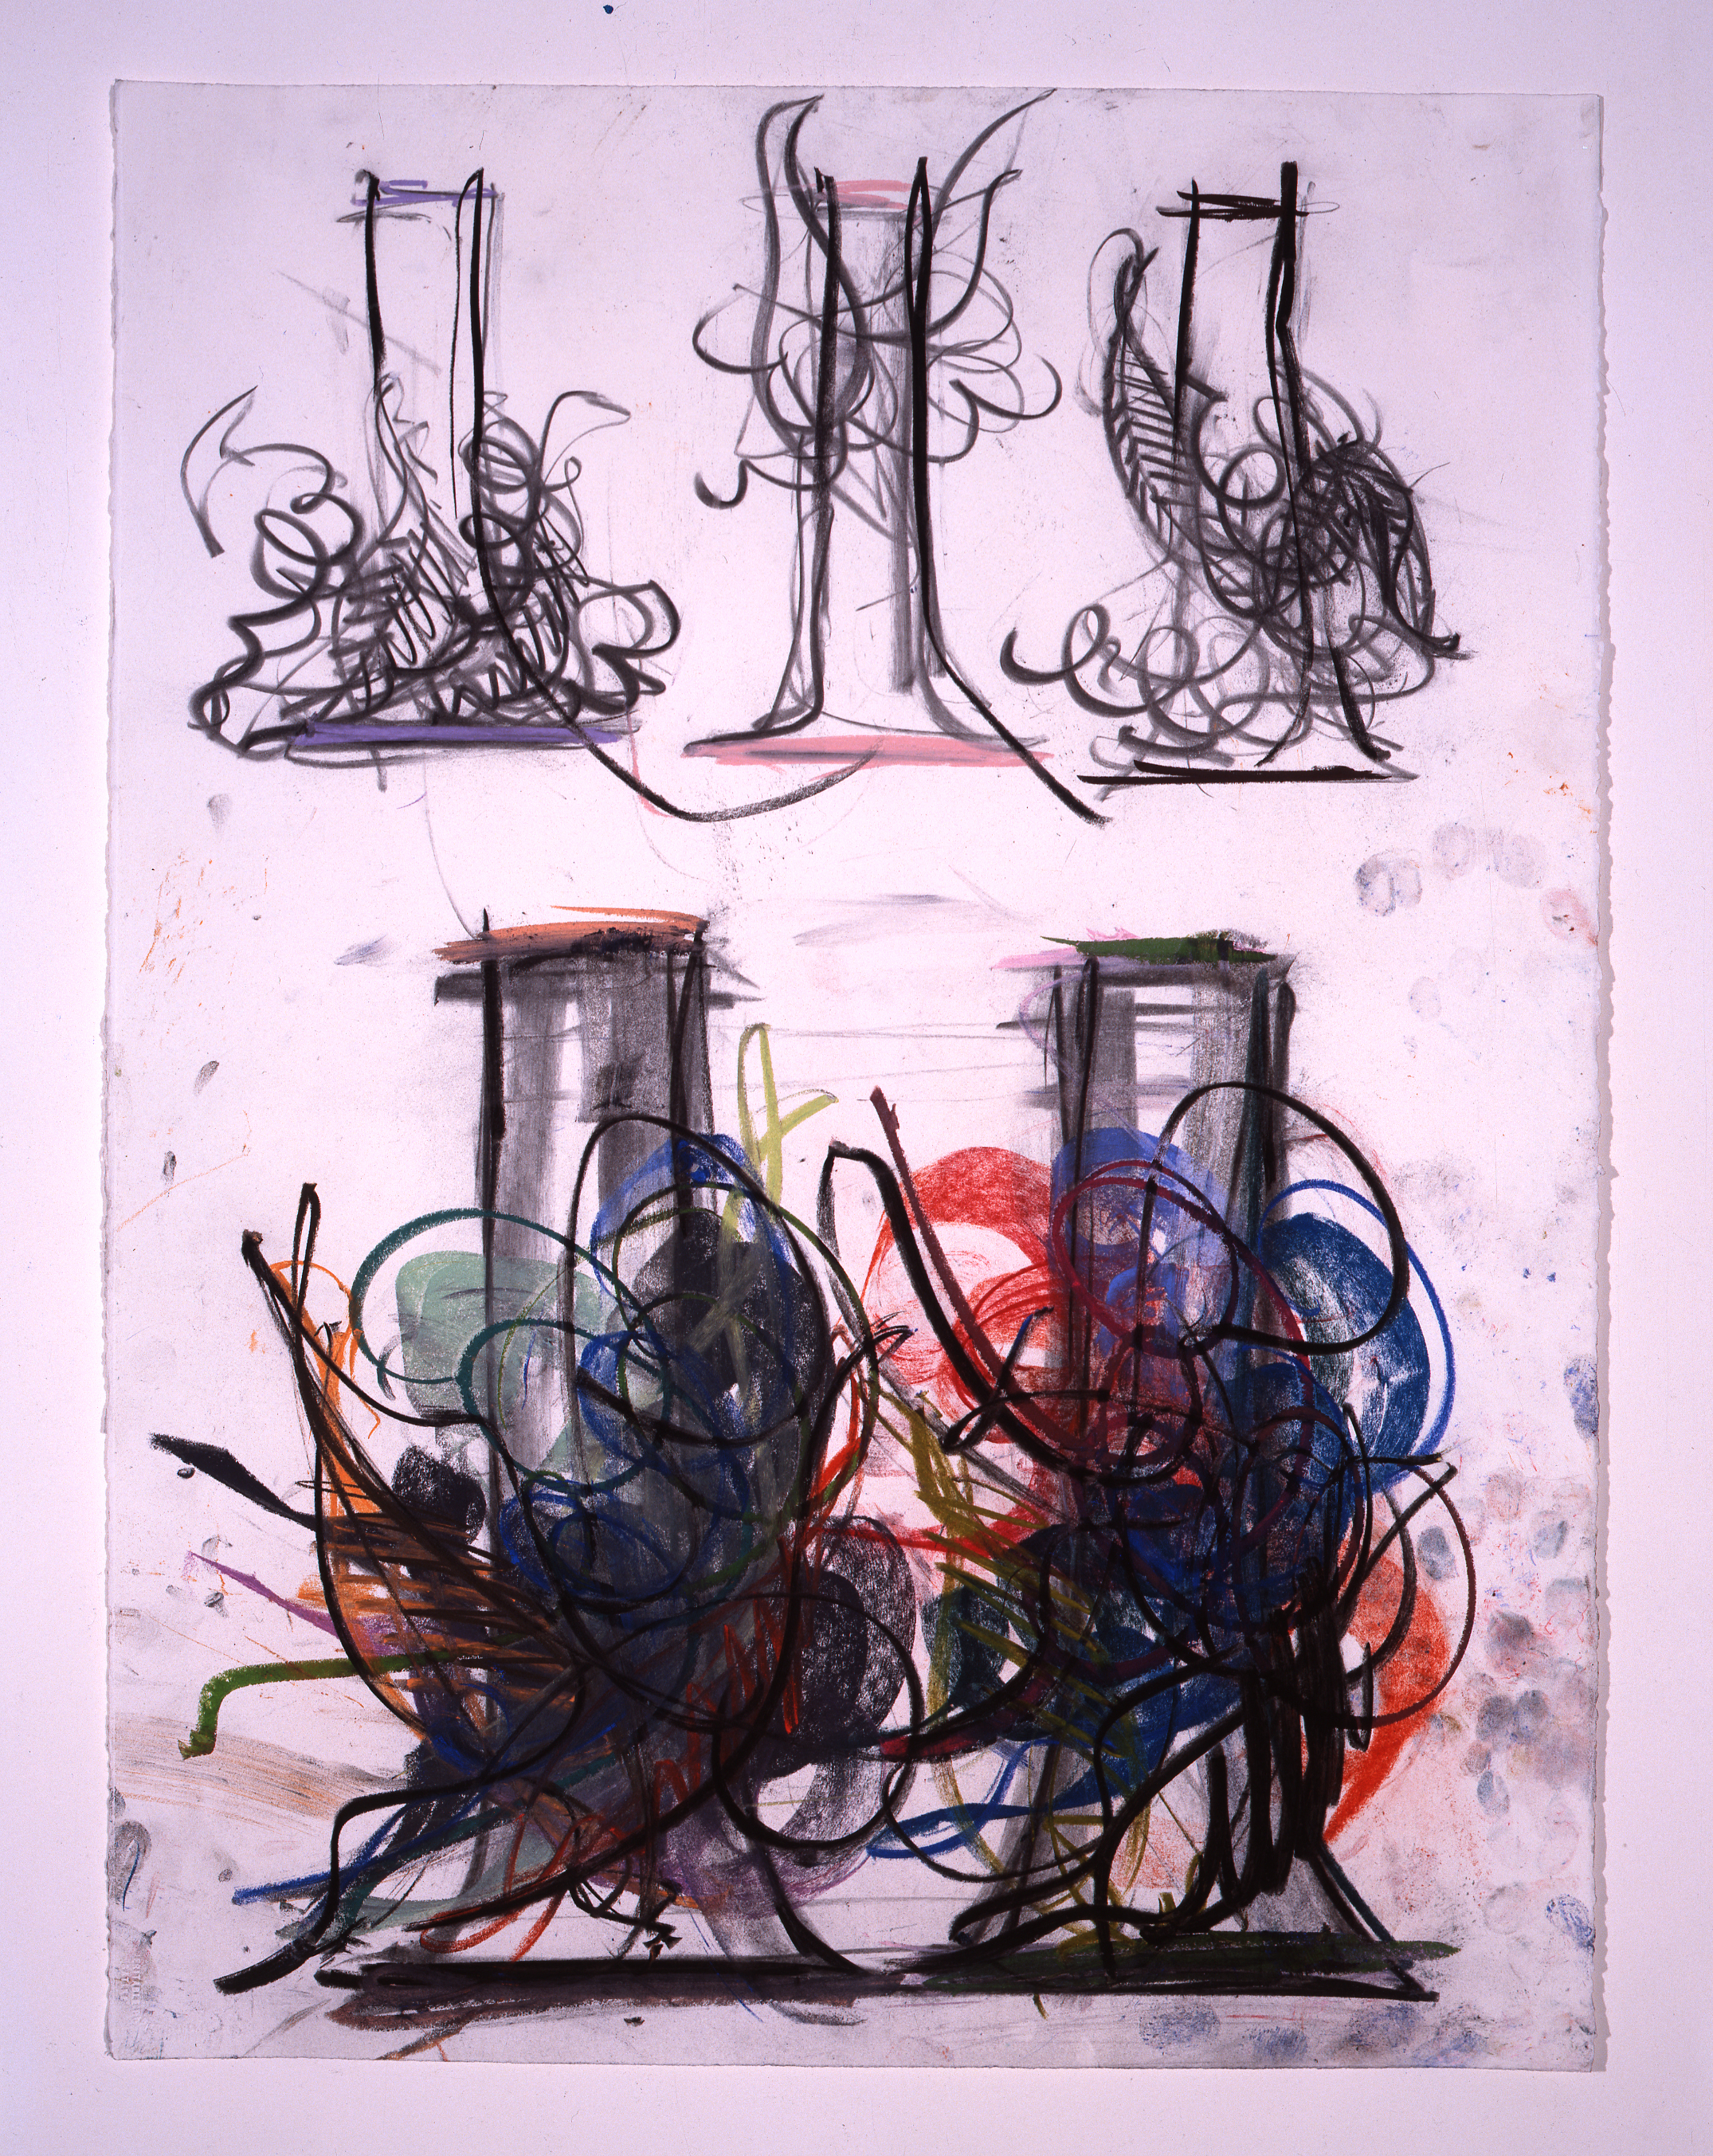  Dale Chihuly,&nbsp; Venetian Drawing,&nbsp; (1990, pastel and charcoal on paper, 30 x 22 inches), DC.387 